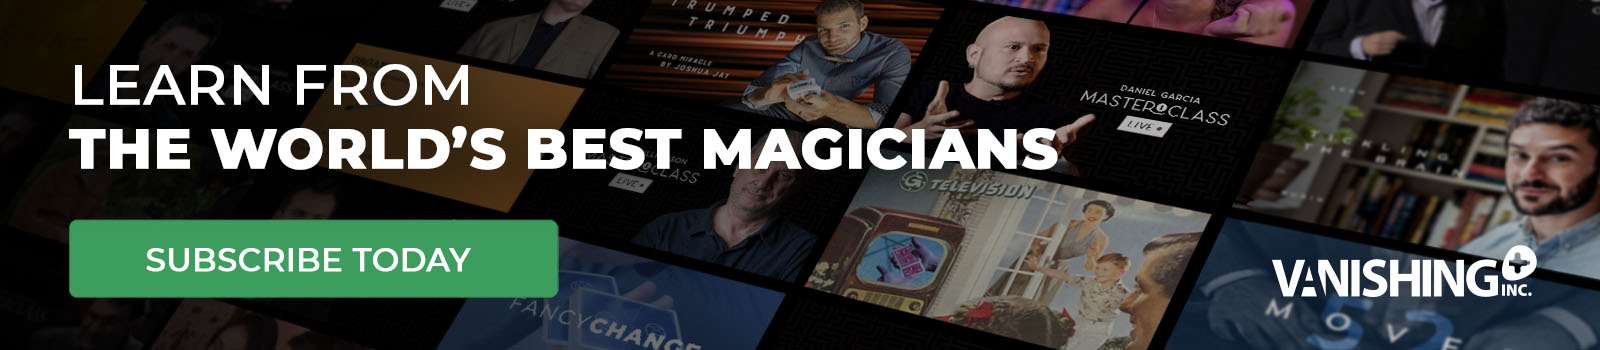 Magic live lectures